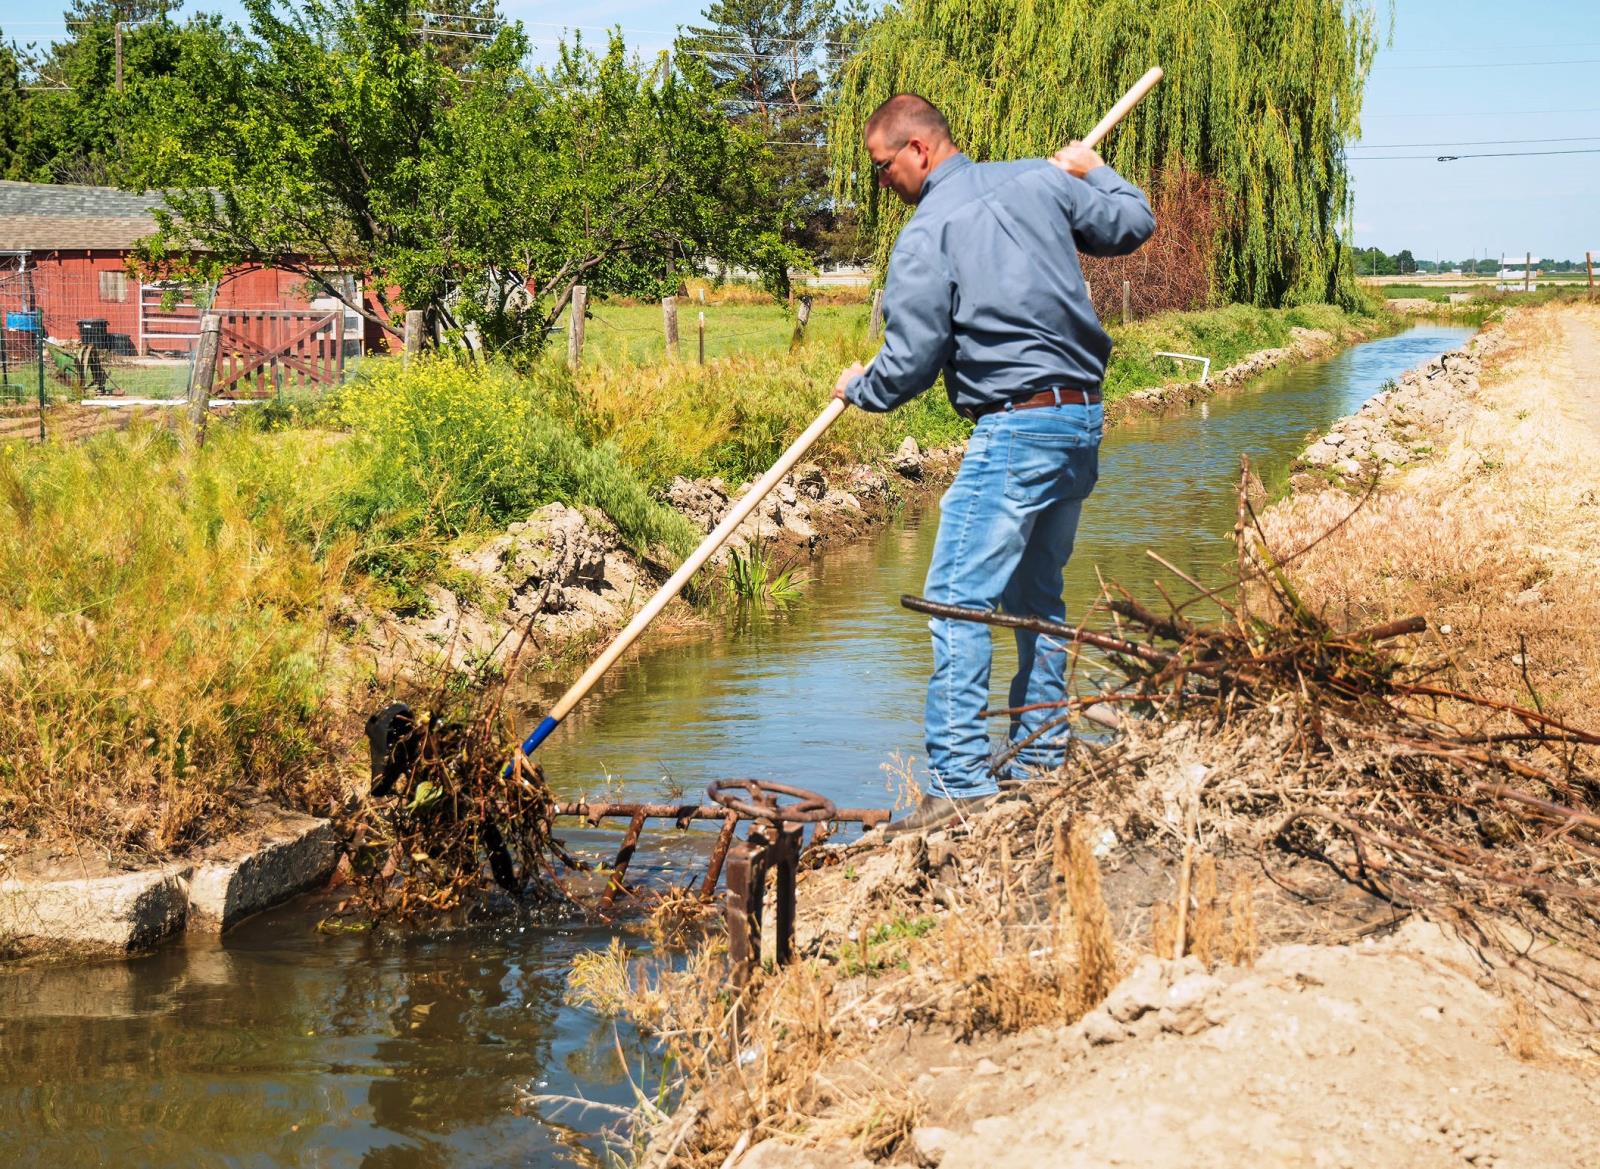 Mark Zirschky, Pioneer Irrigation District superintendent, clears trash and debris from a weed rack on a small canal in Canyon County.